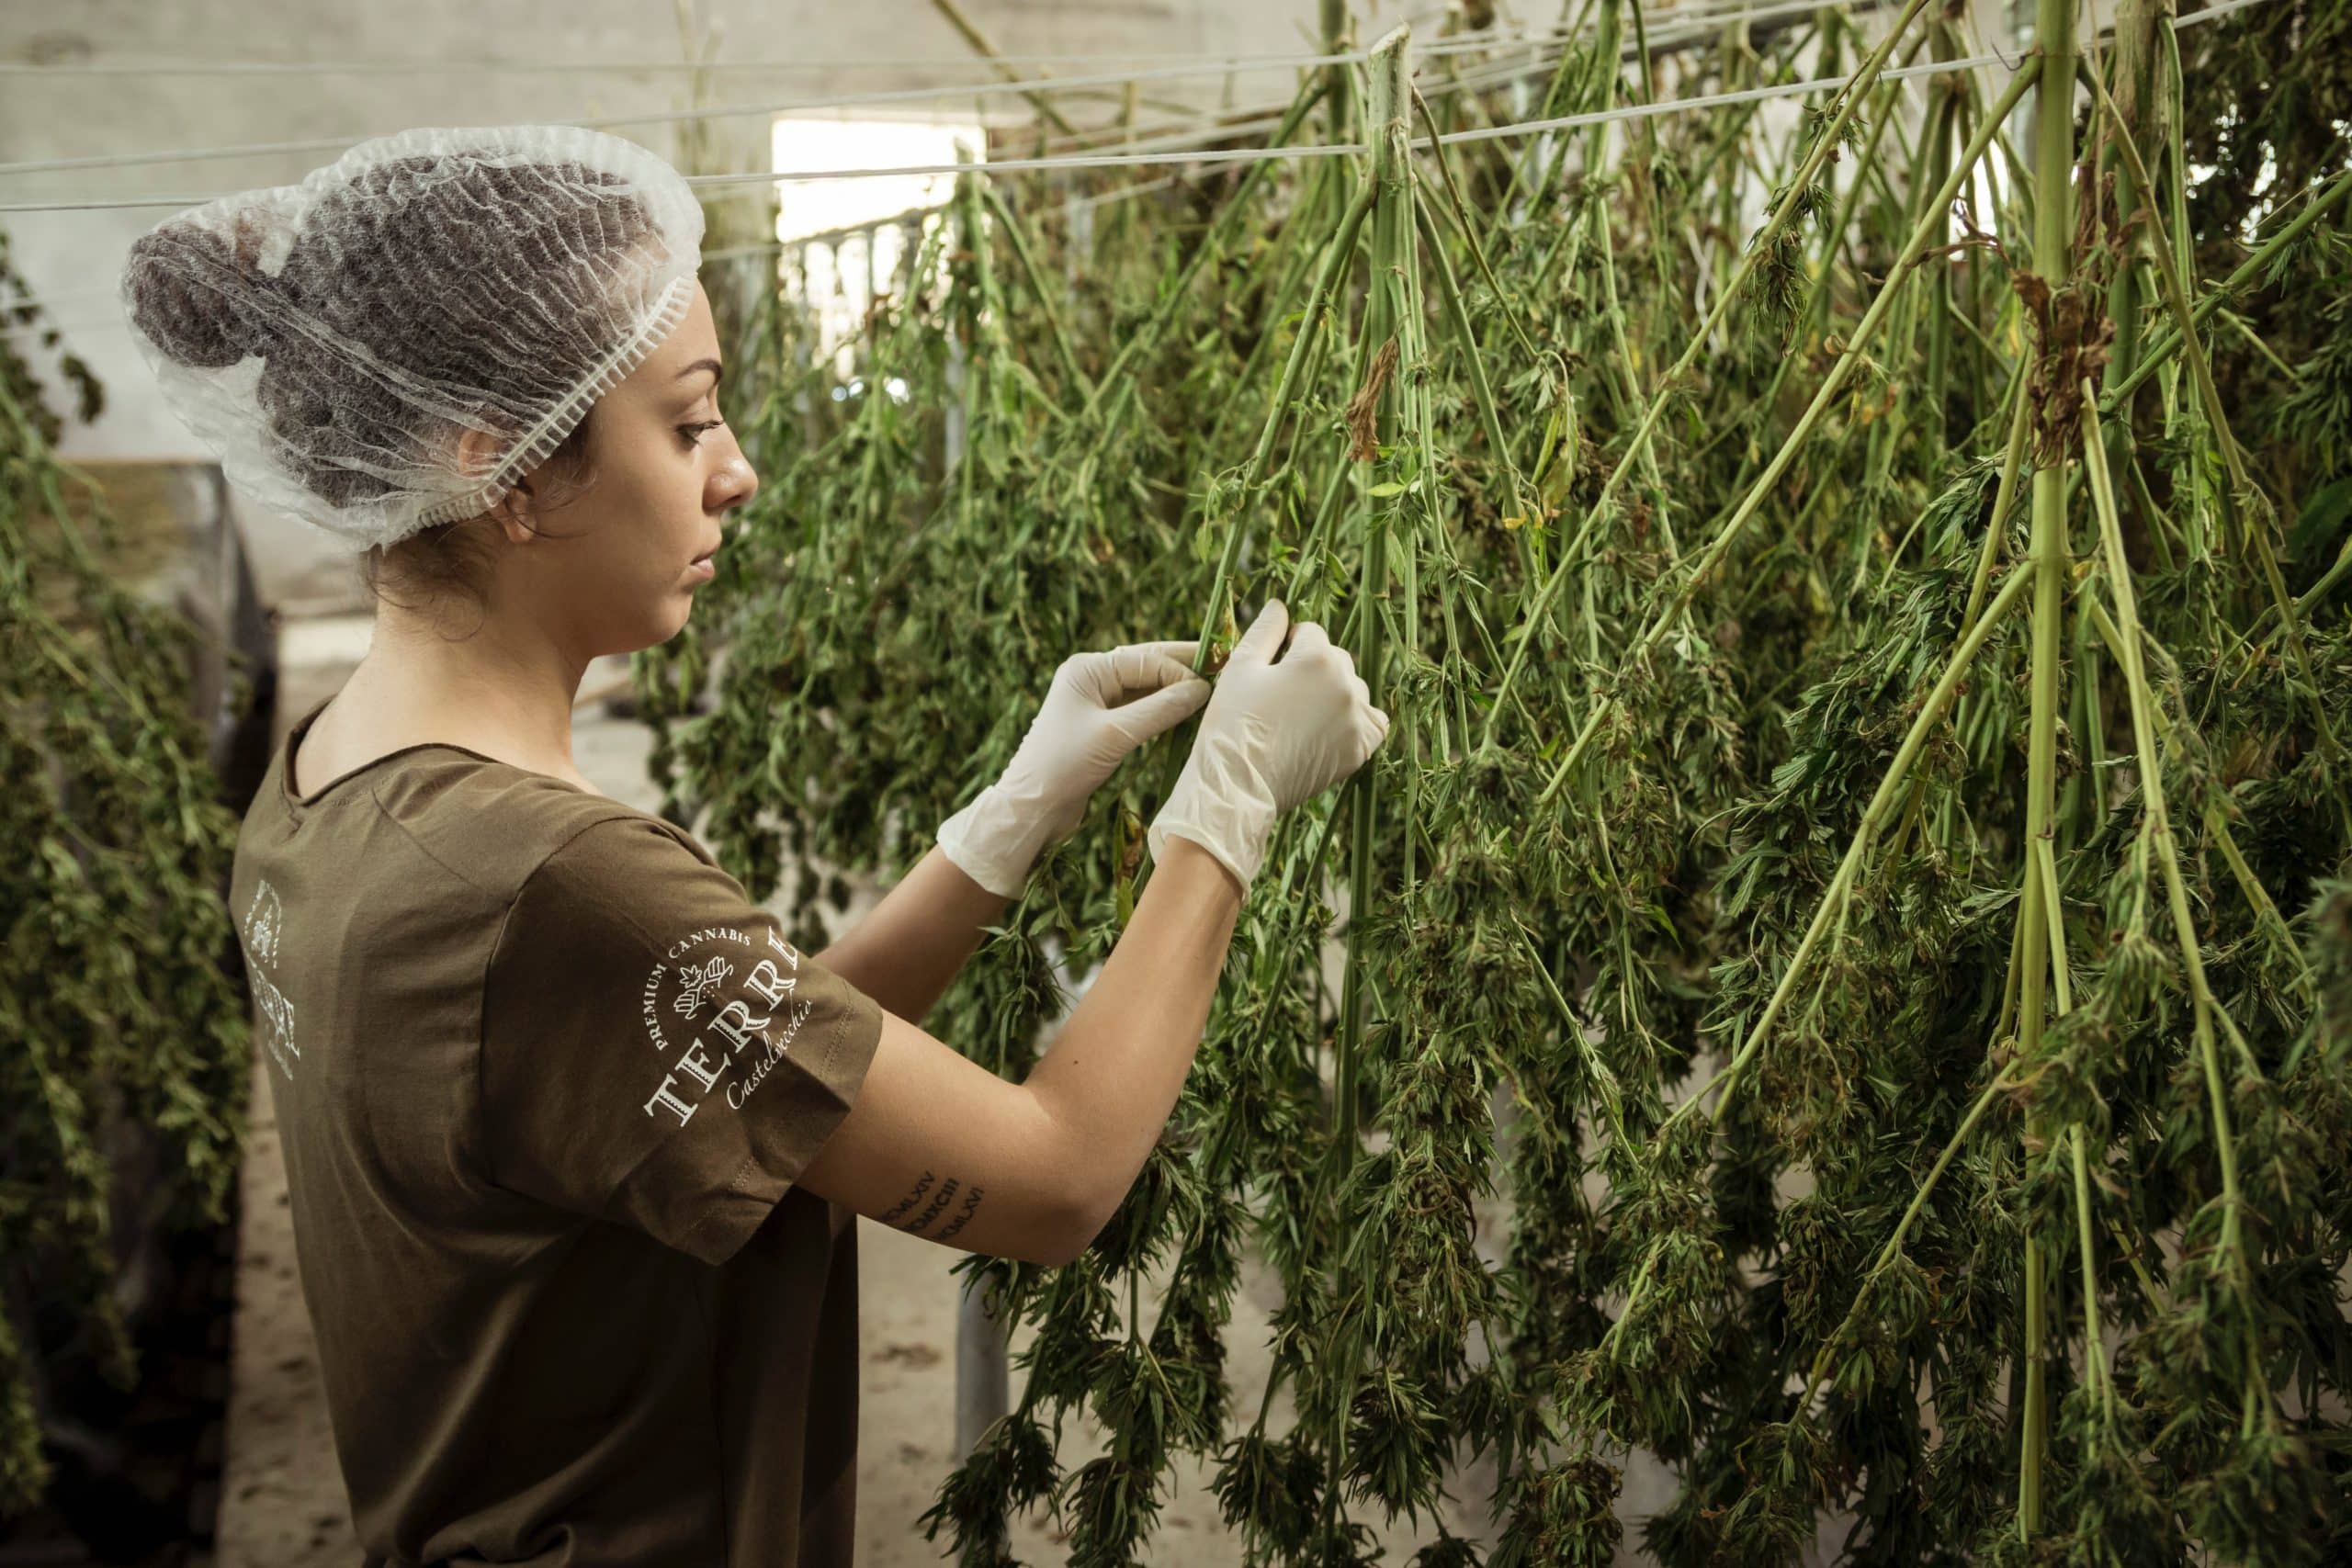 How Much Weed Can You Get from Growing One Cannabis Plant?